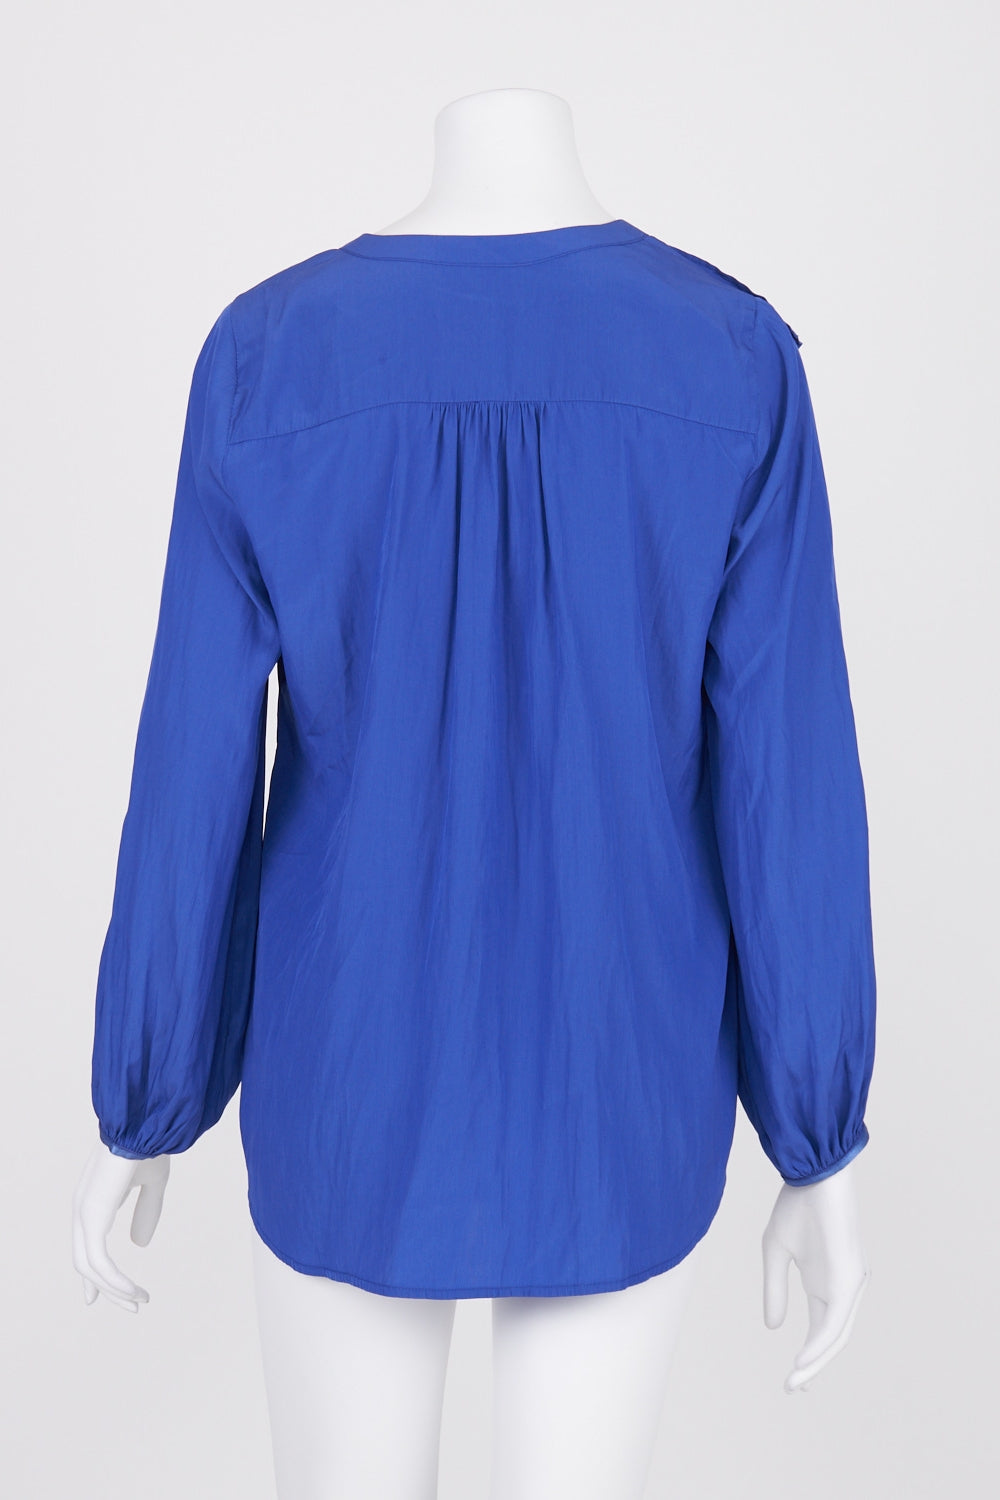 Motto Blue Ruffle Front Top 12